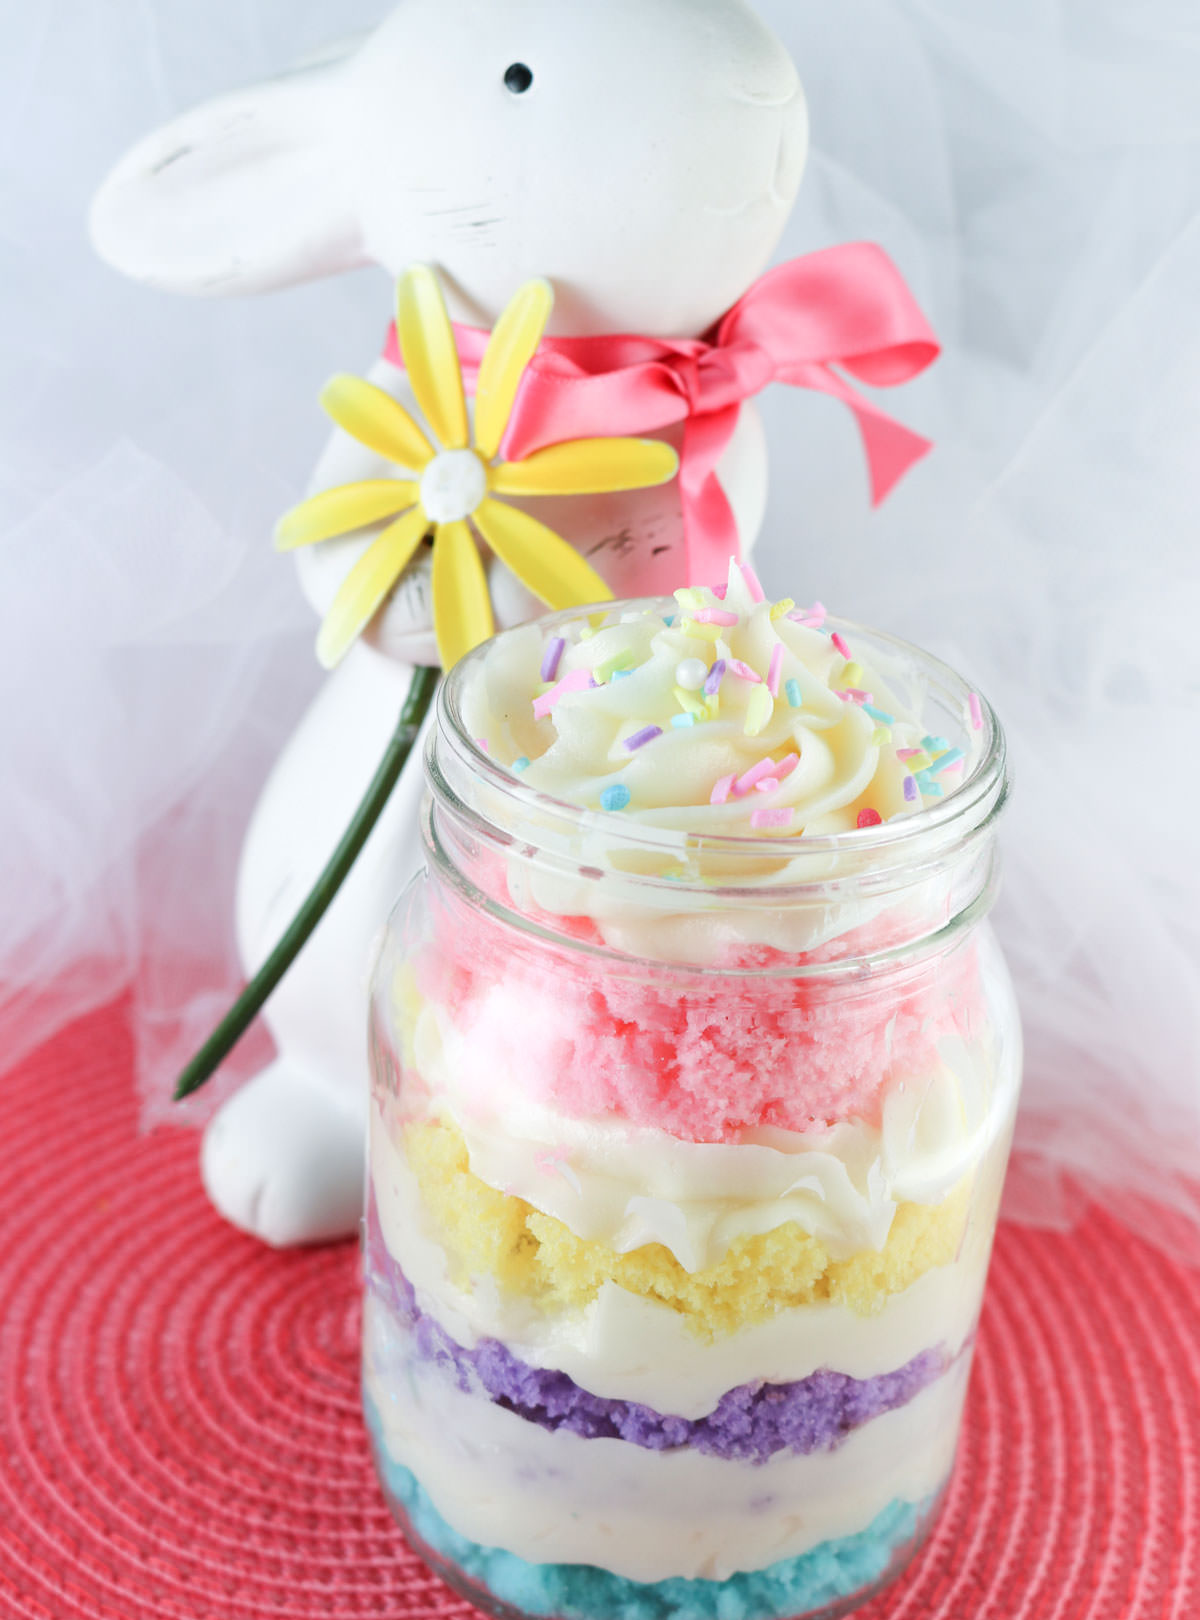 Closeup on a Springtime Cupcake in a  Jar sitting on a pink placemat in front of a white easter bunny decoration holding a yellow flower.